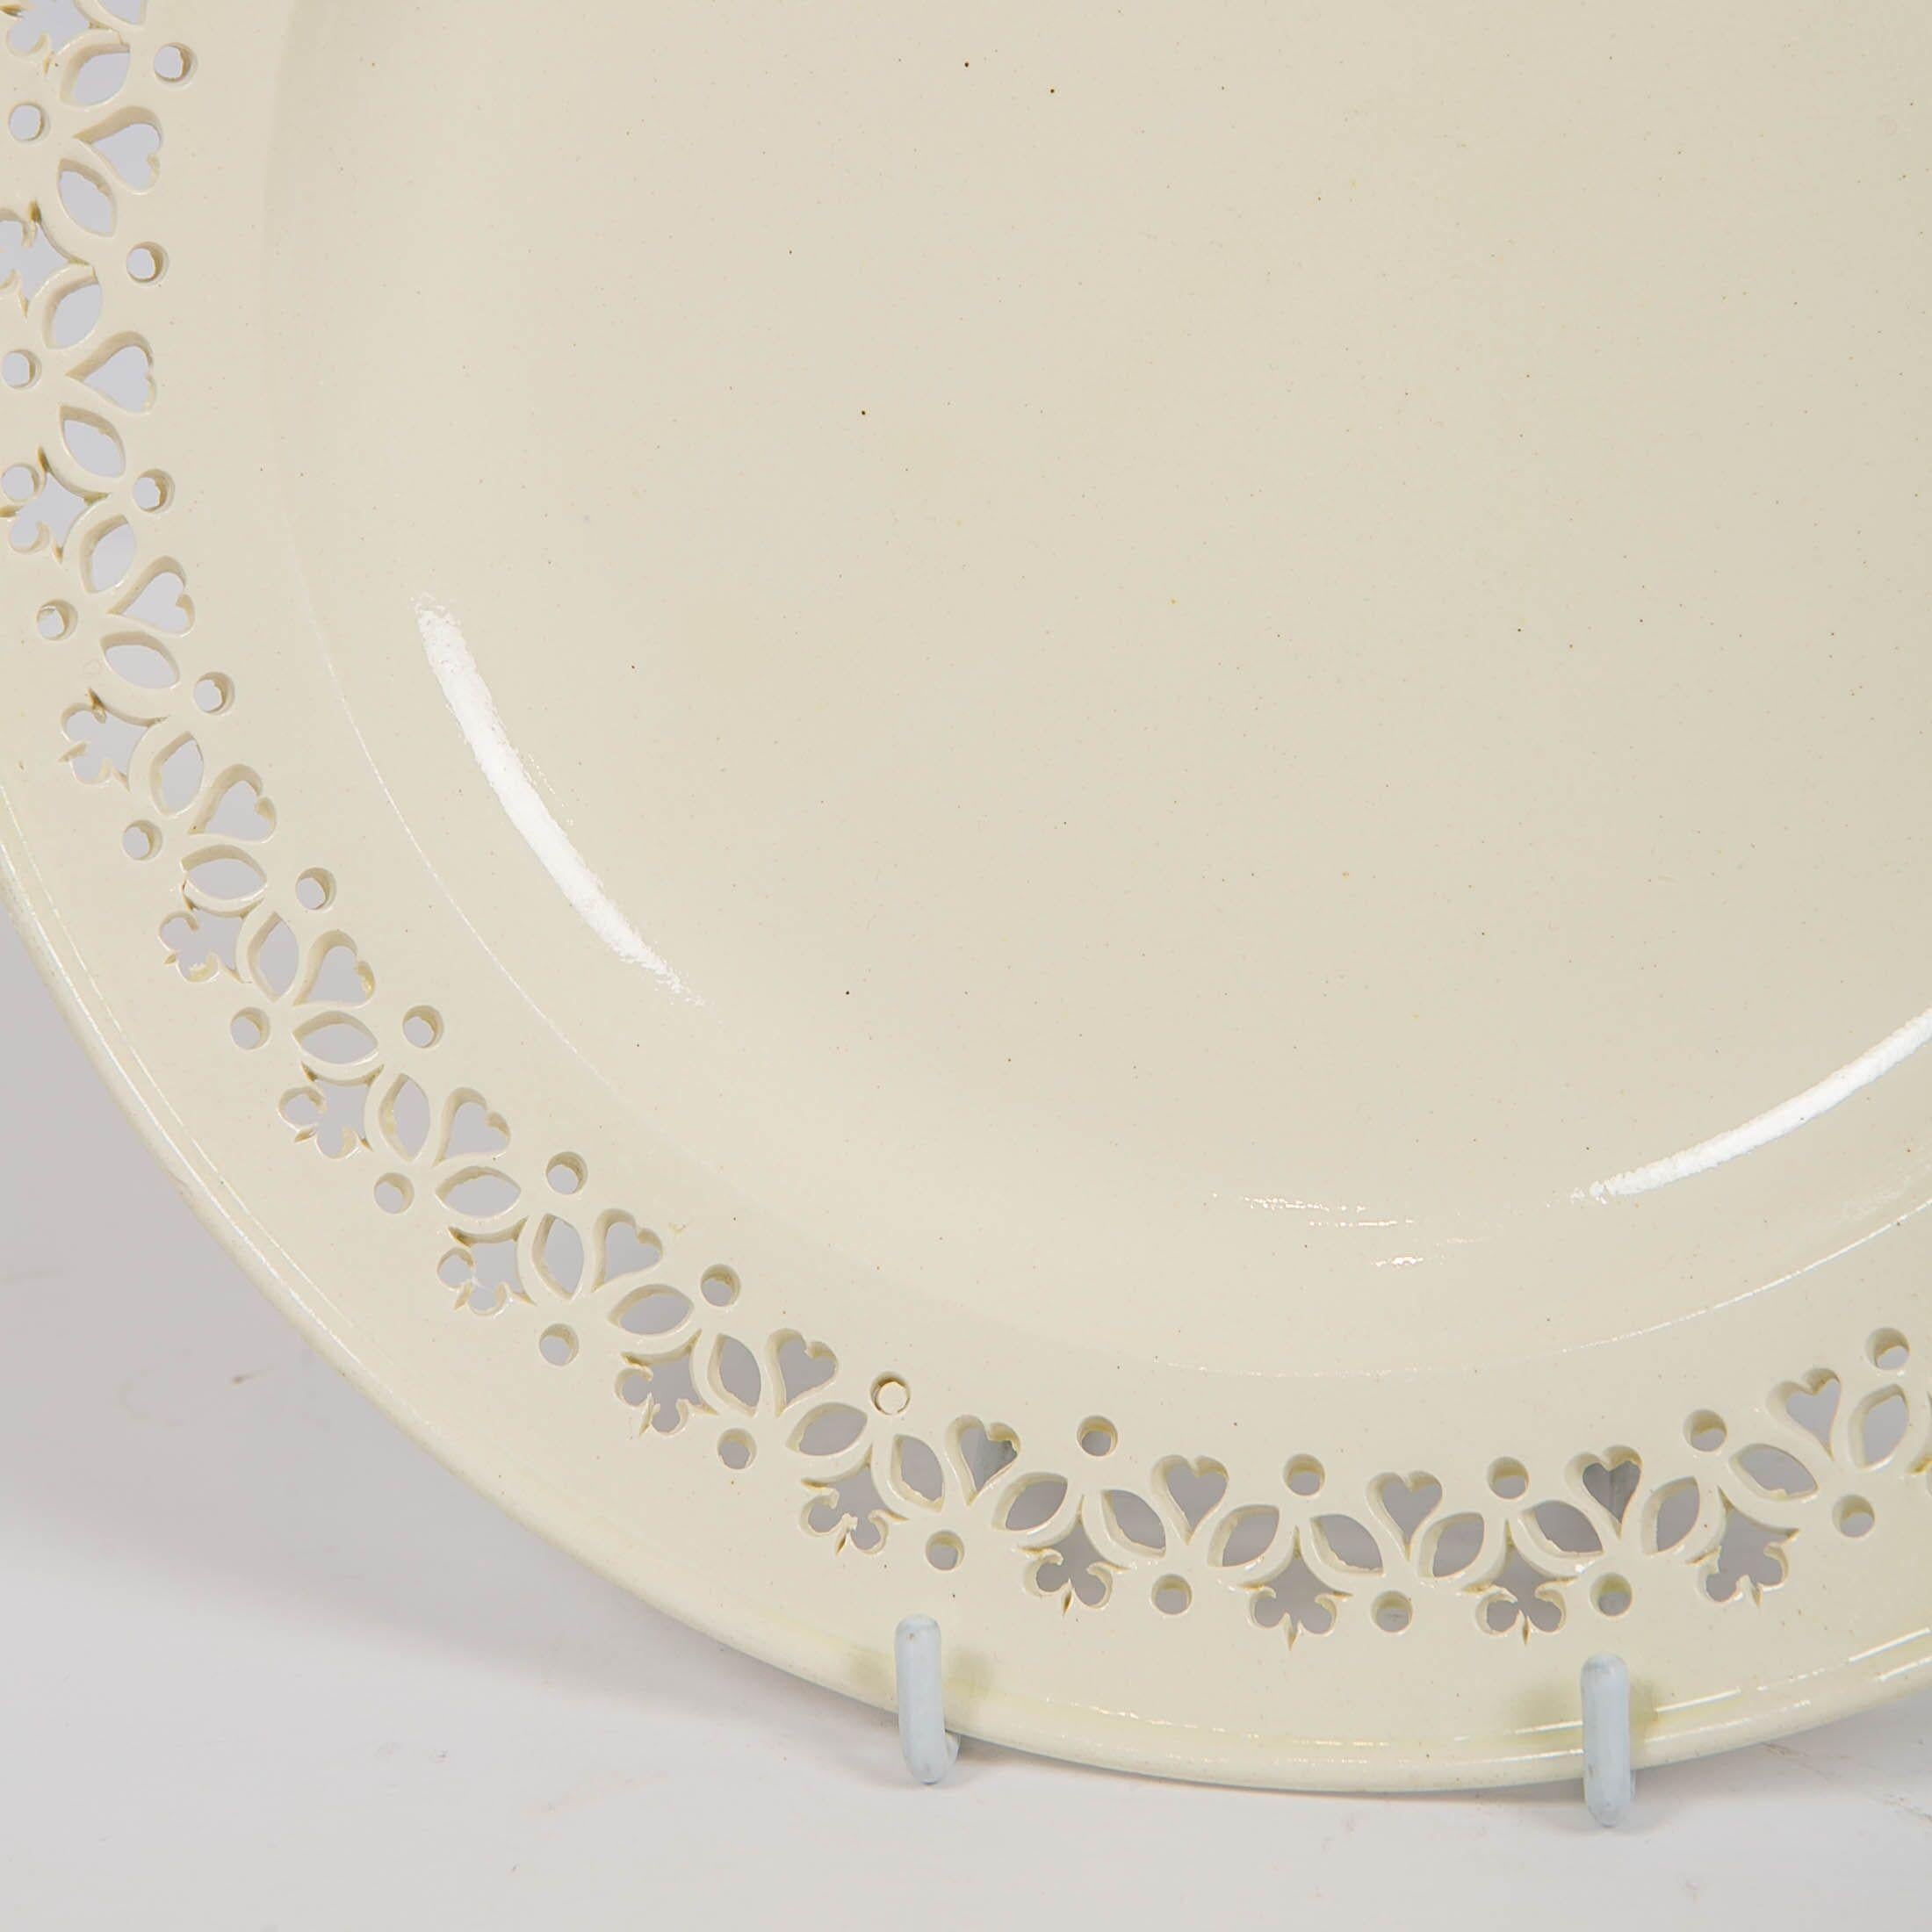 Why we love it:
18th century pierced creamware is simply elegant and beautiful.
We are proud to present this fantastic set of six antique pierced creamware dinner plates made in England, circa 1790. These late 18th century plates have heart and